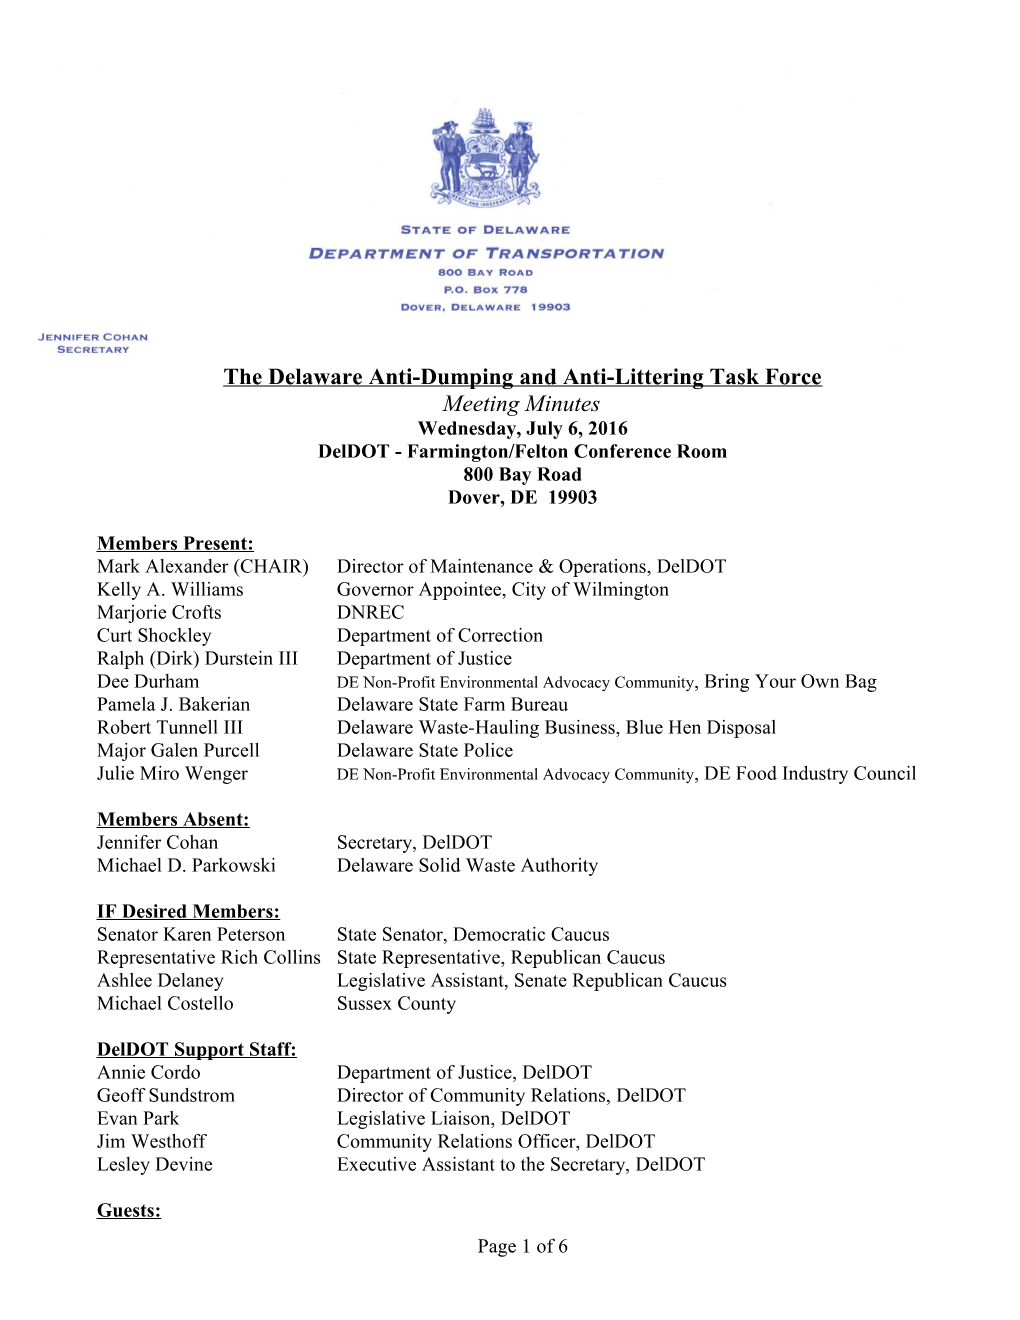 The Delaware Anti-Dumping and Anti-Littering Task Force